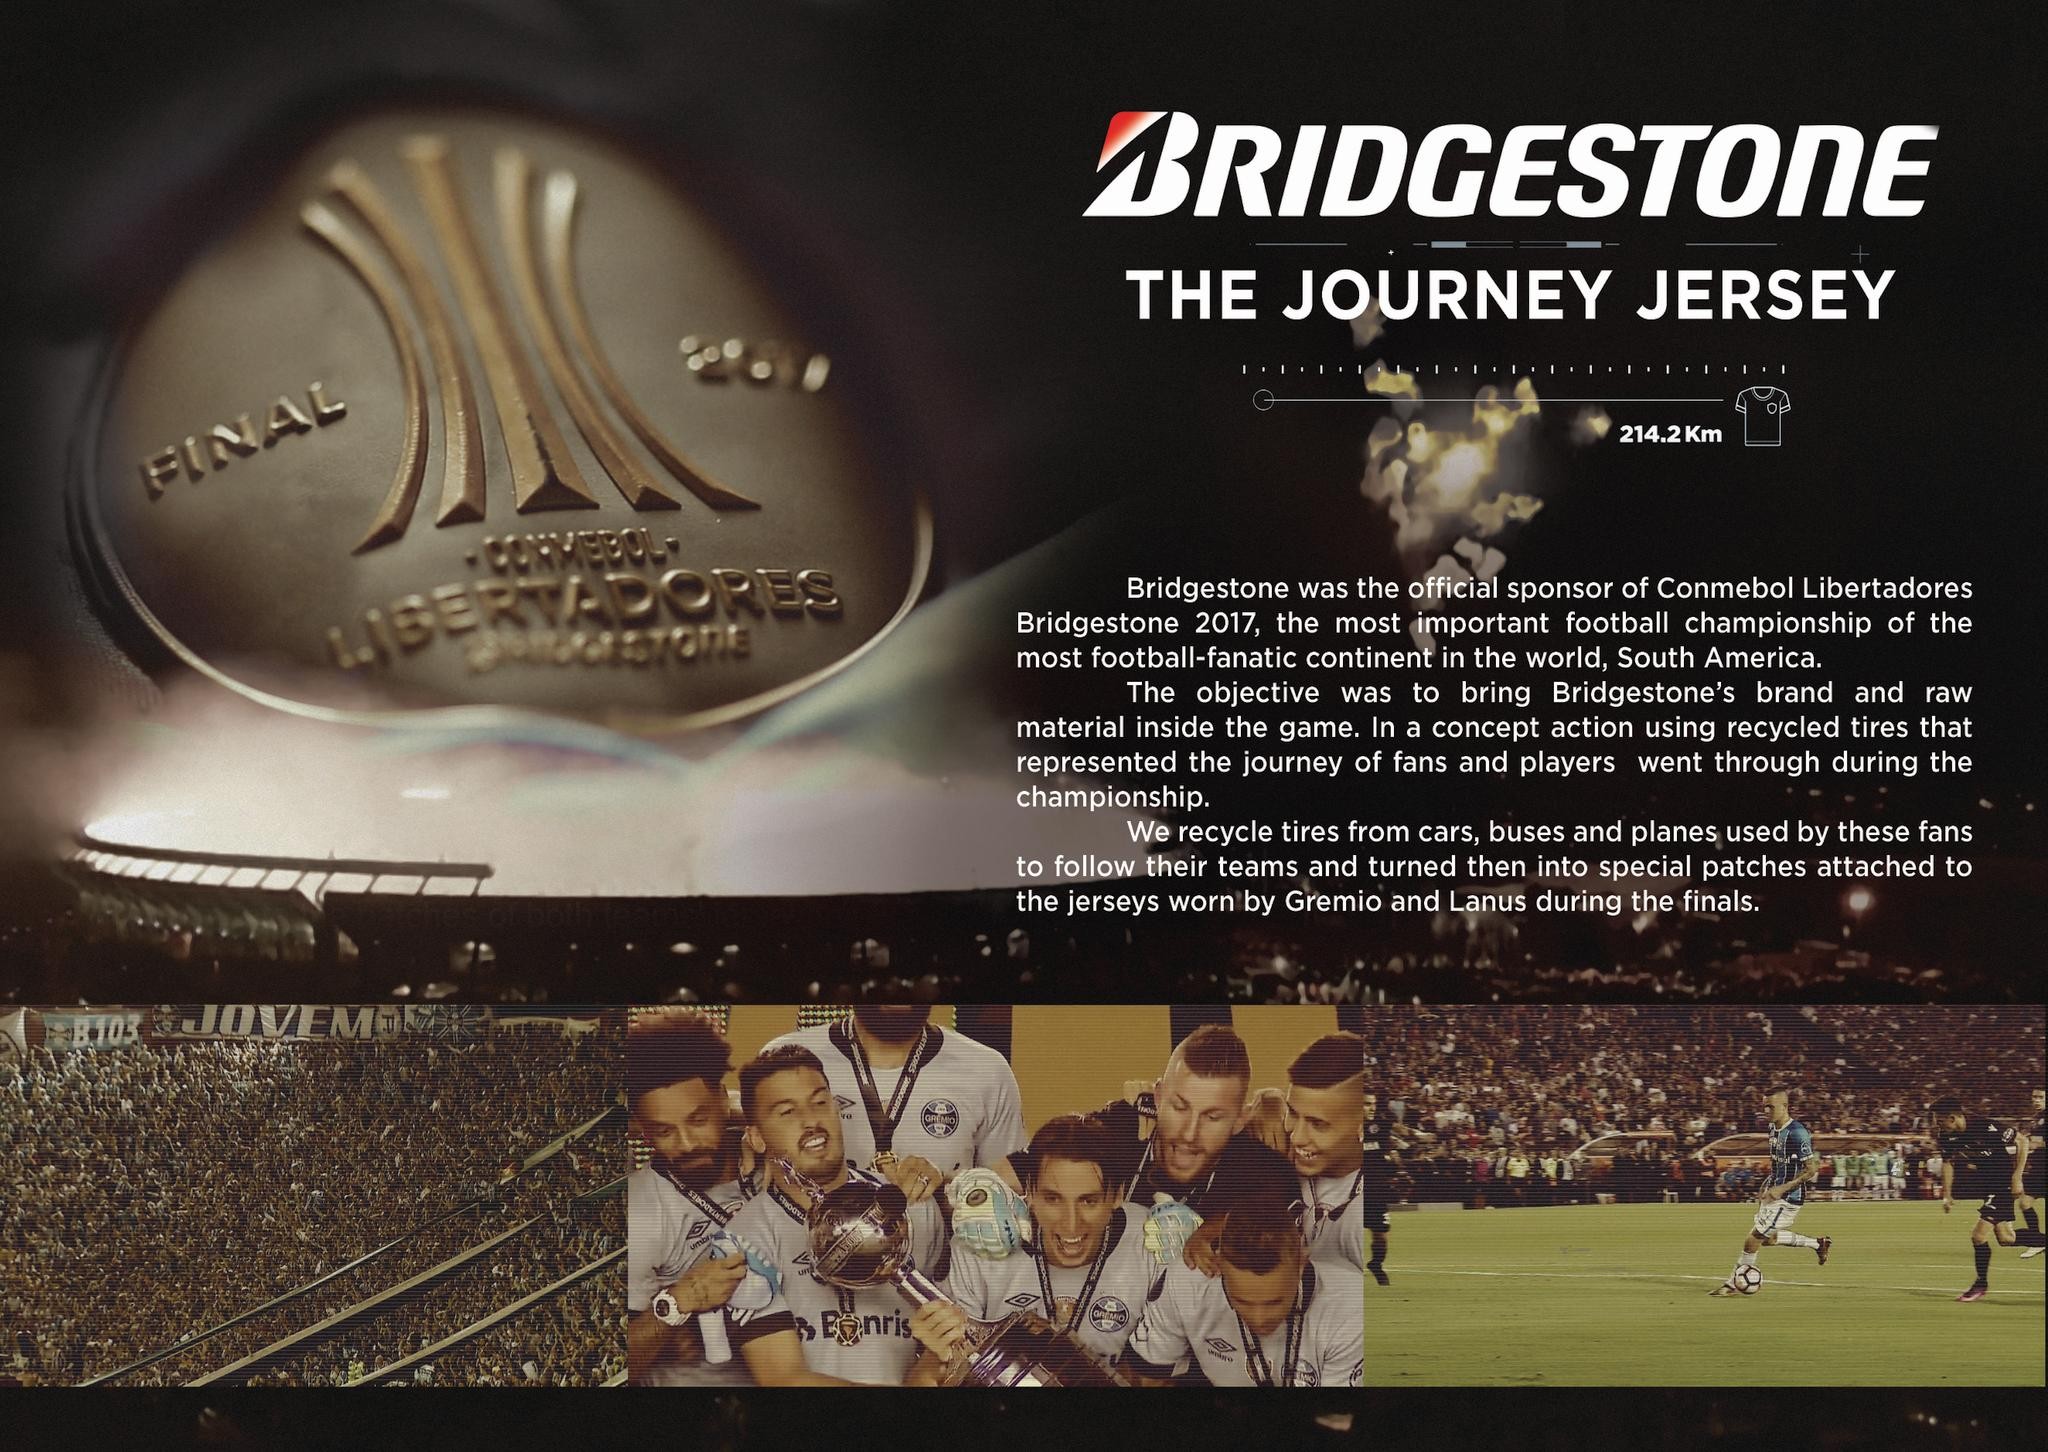 The Journey Jersey